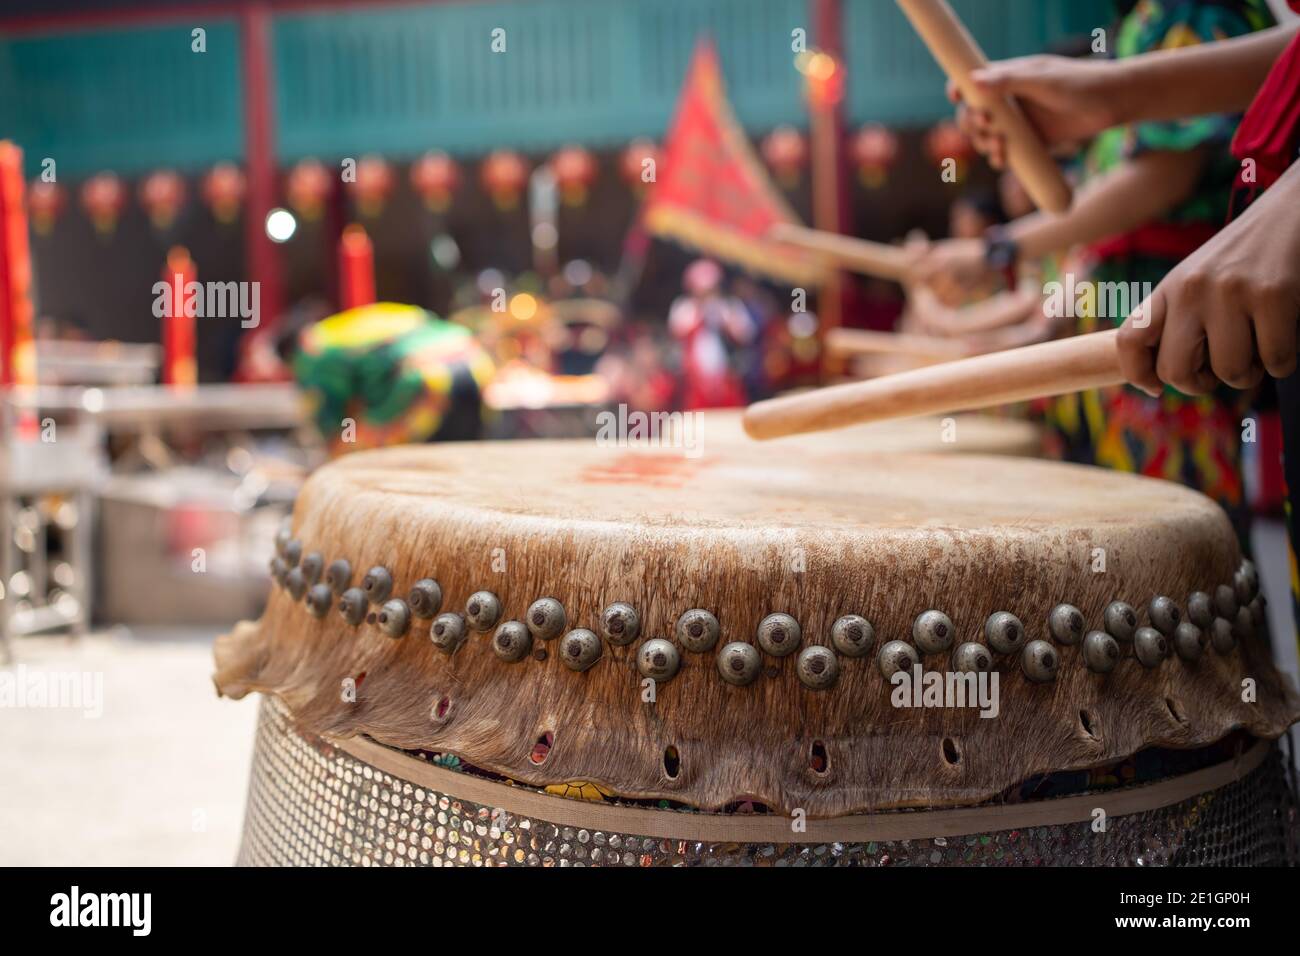 People drumming the Chinese drums to celebrate Lunar New Year Stock Photo